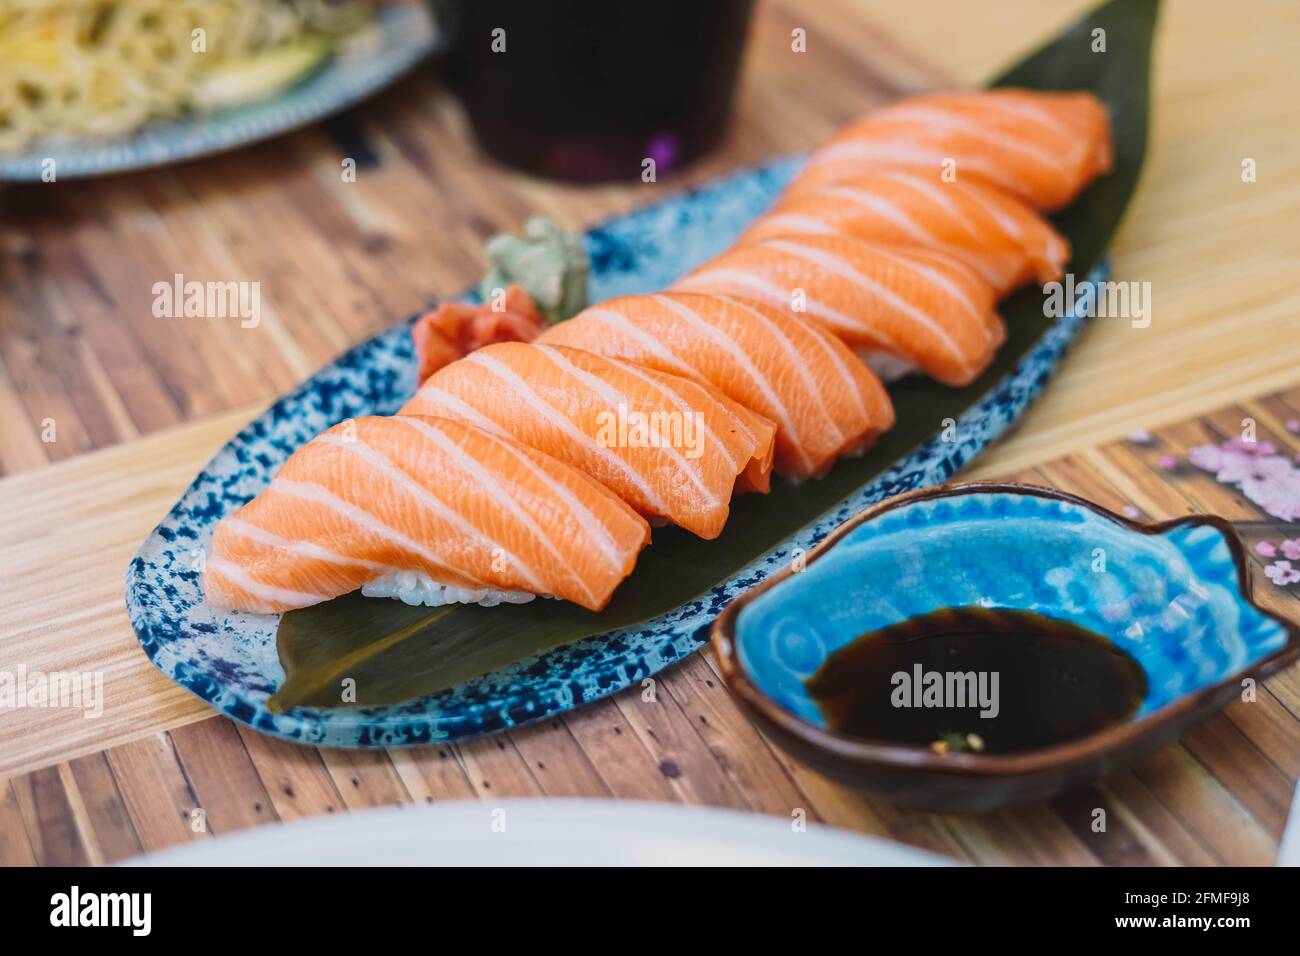 Sushi plate consisting of salmon nigiri, with soy sauce, served on a terrace. Stock Photo